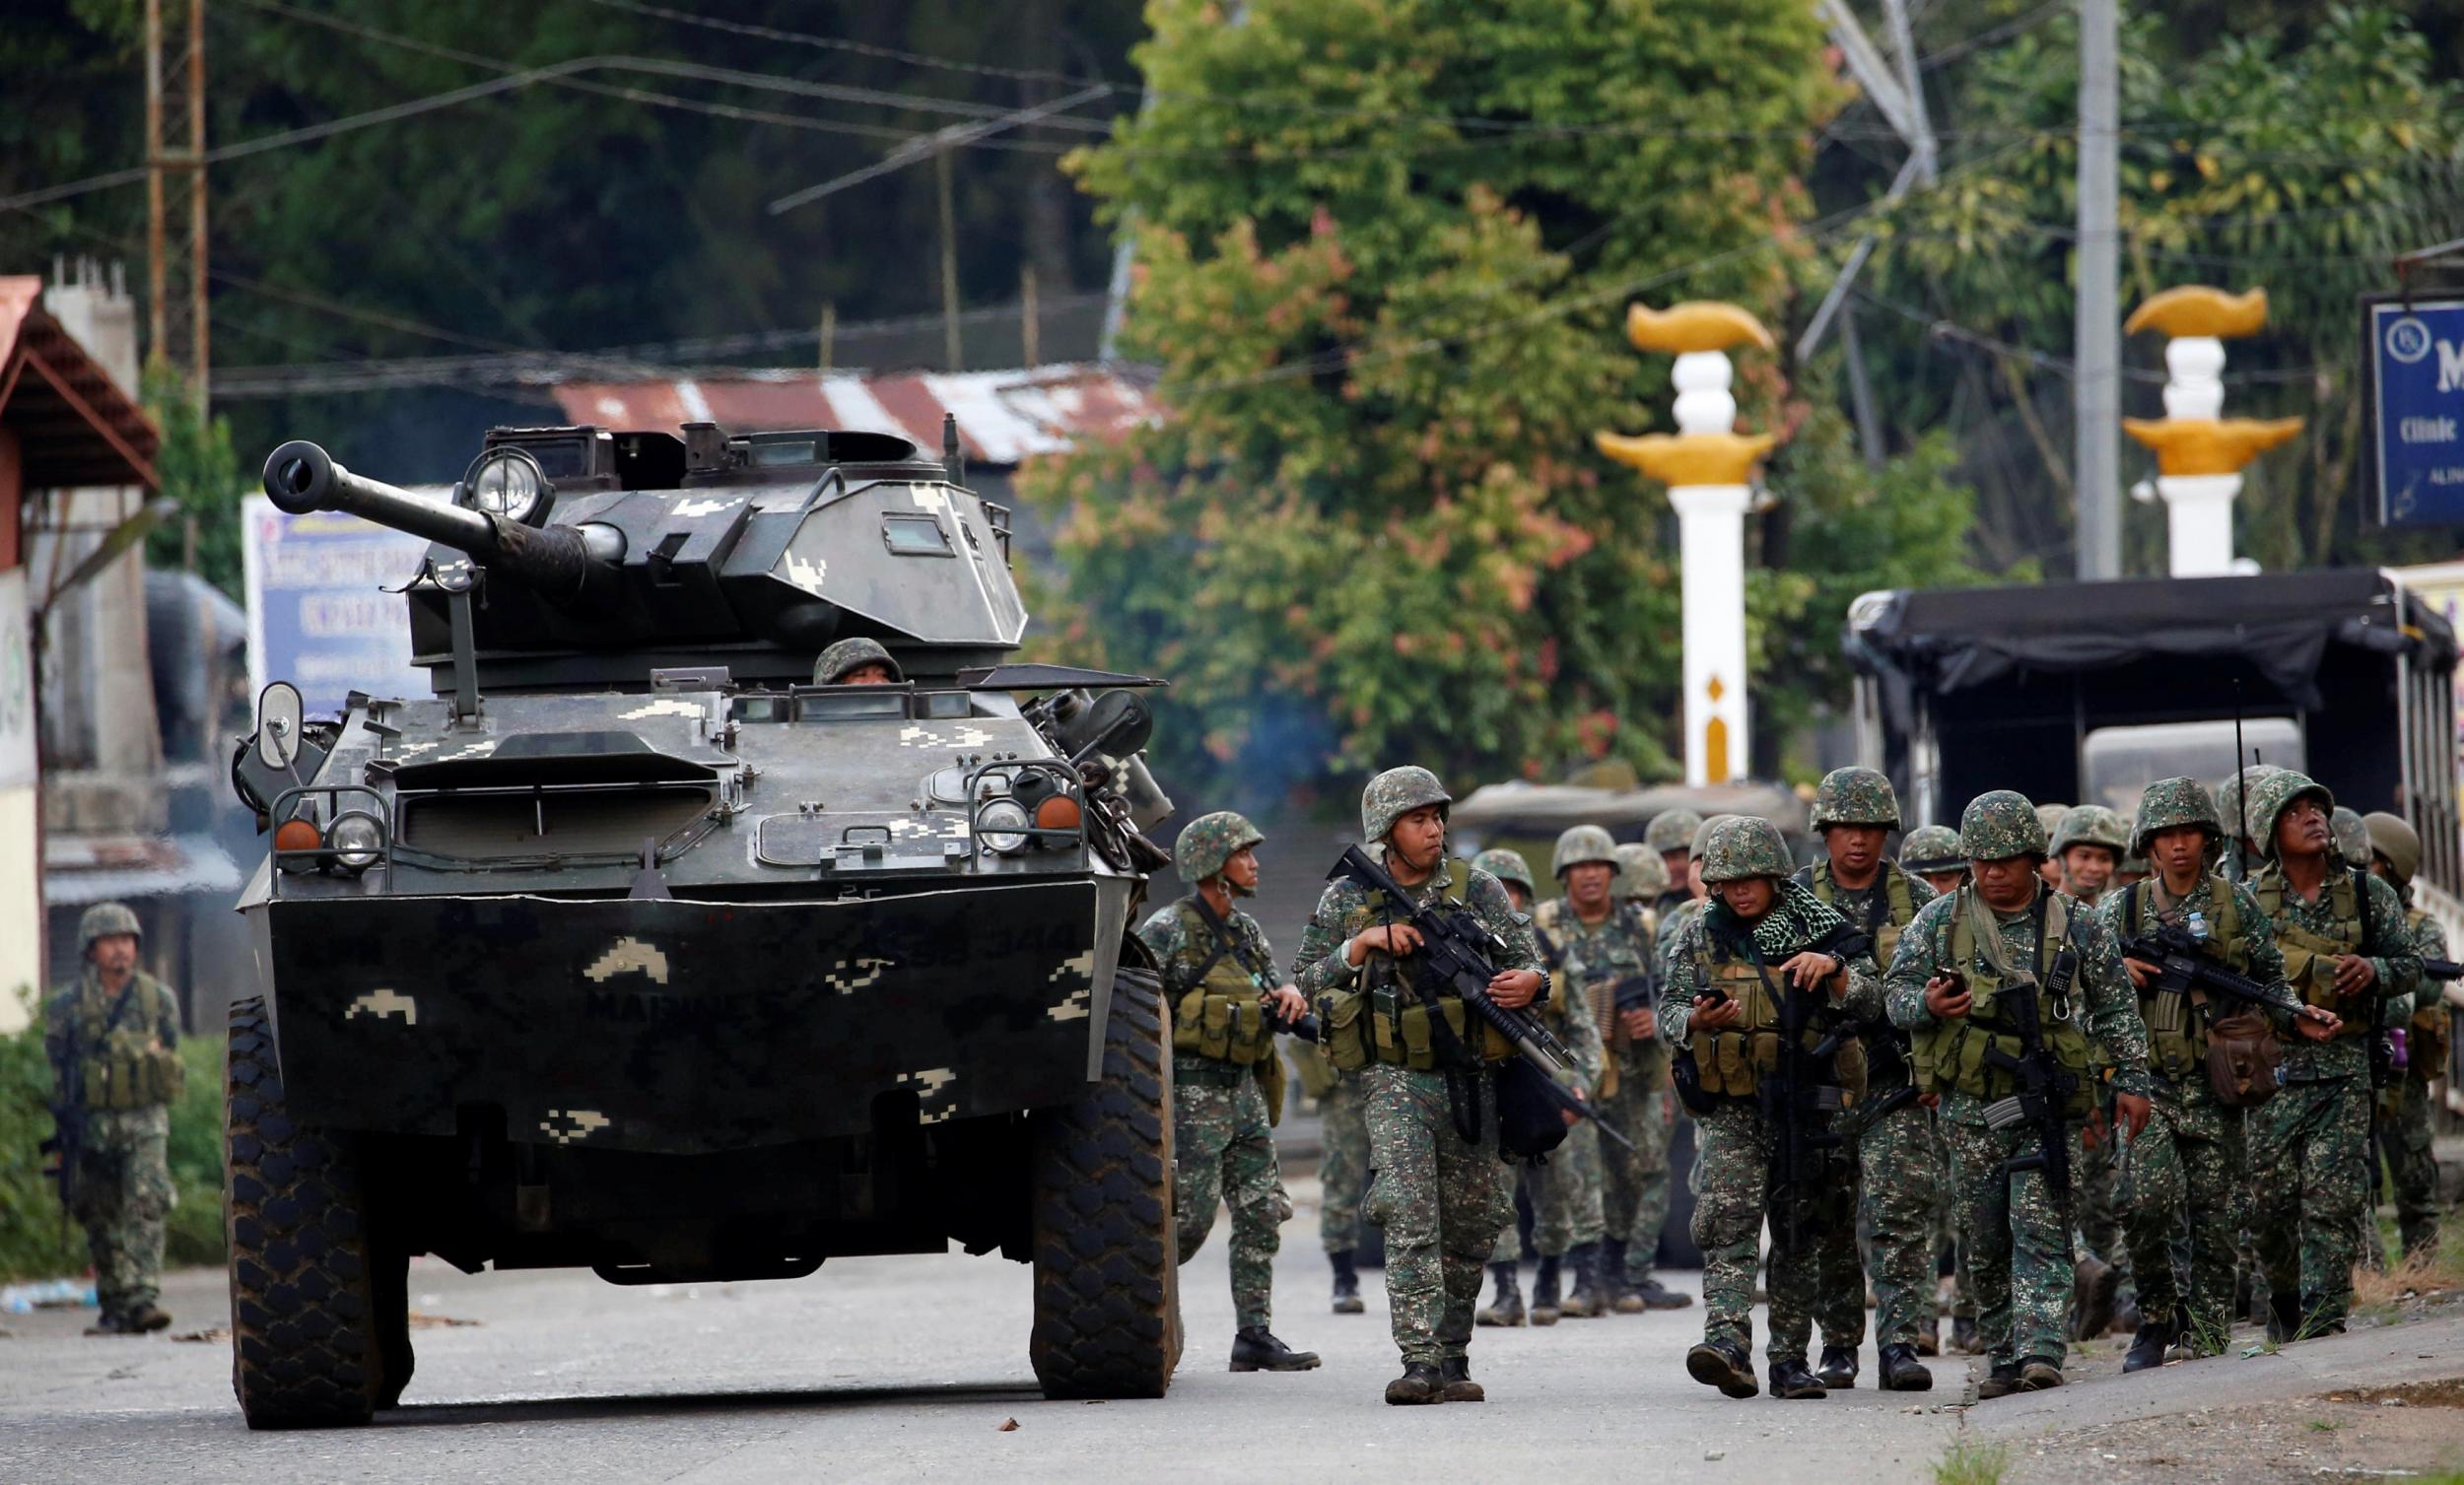 Marawi siege: Isis-linked militants dump bodies of civilians as rampage in Philippines city continues